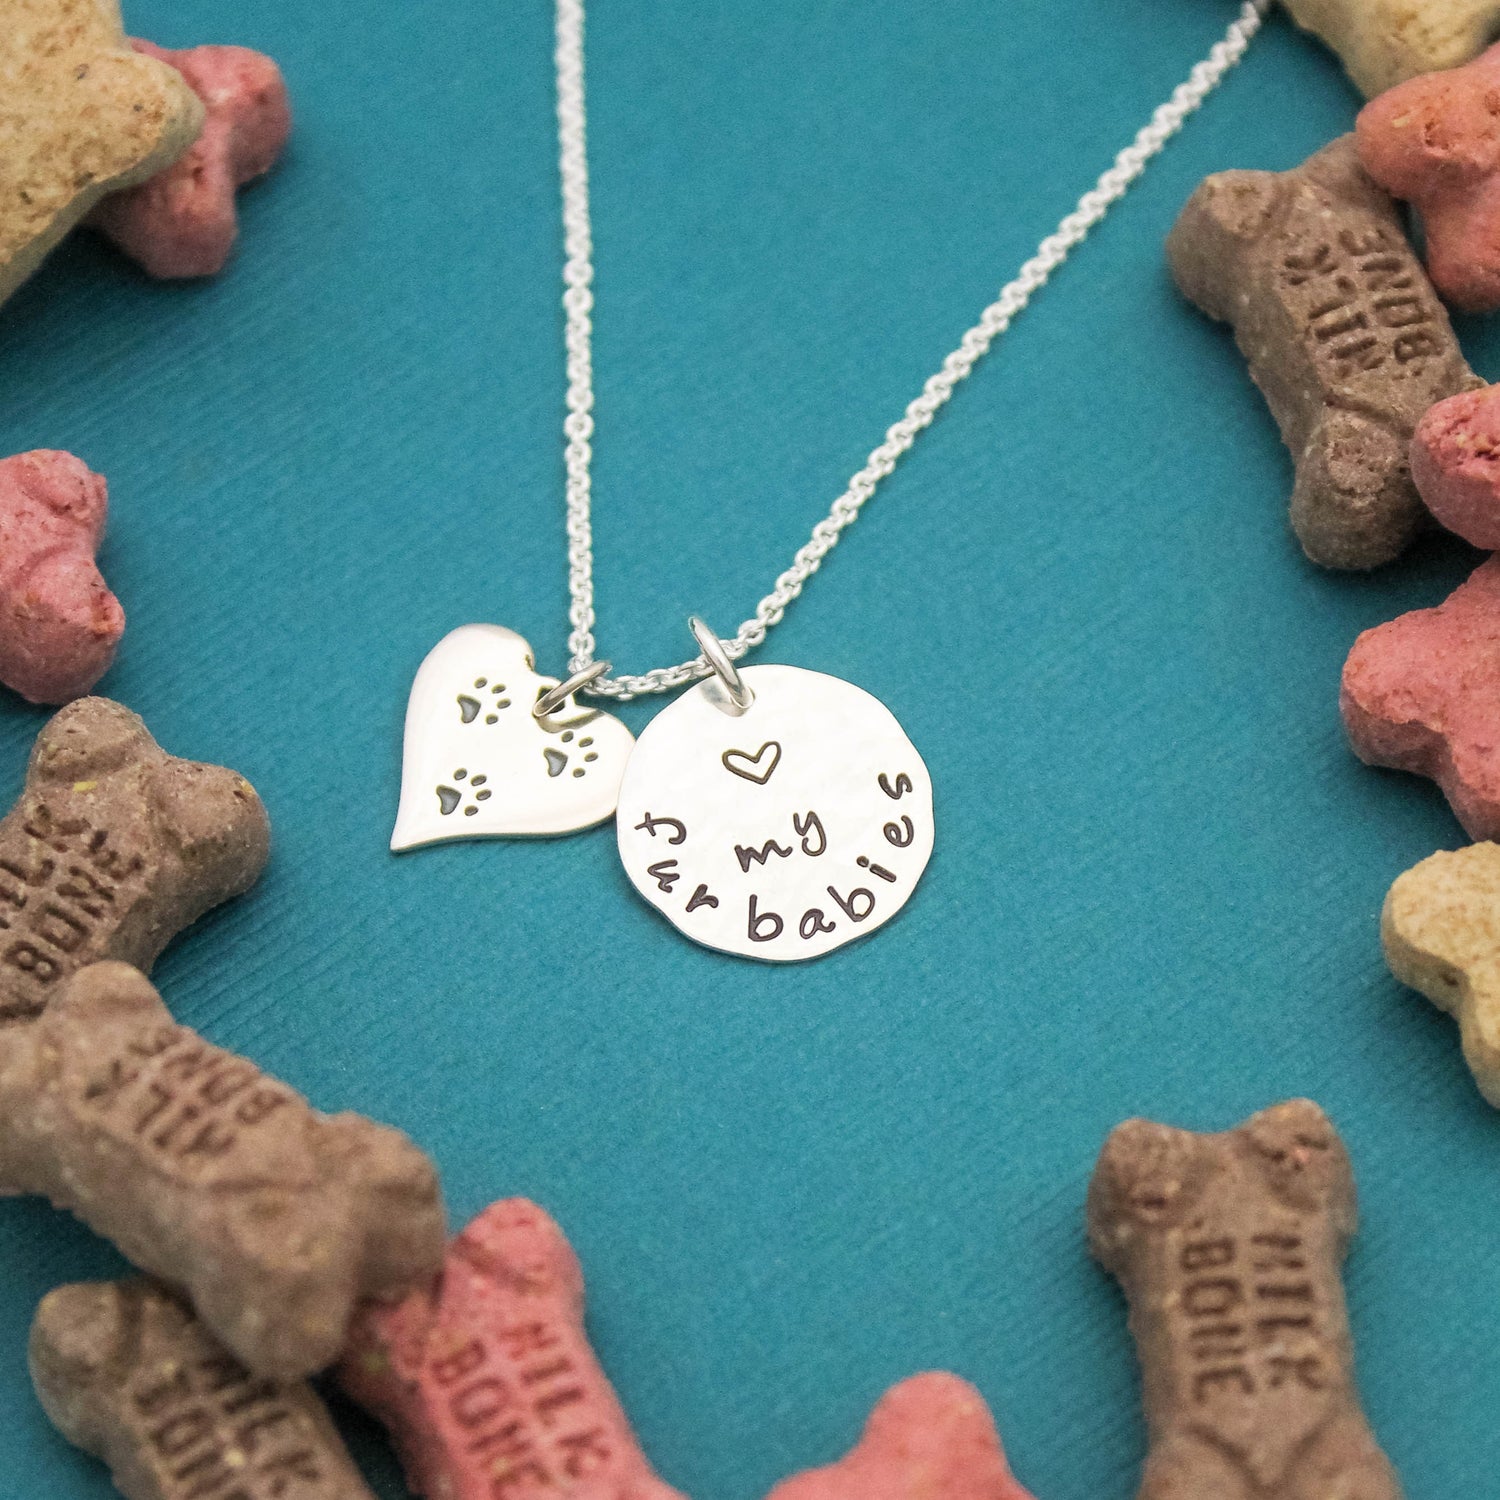 LOVE my Furbabies Necklace, Sterling Silver Dog Necklace, Dog Lover Gift, New Pet Gift, Dog Paw Jewelry, Paw Print Necklace, Hand Stamped